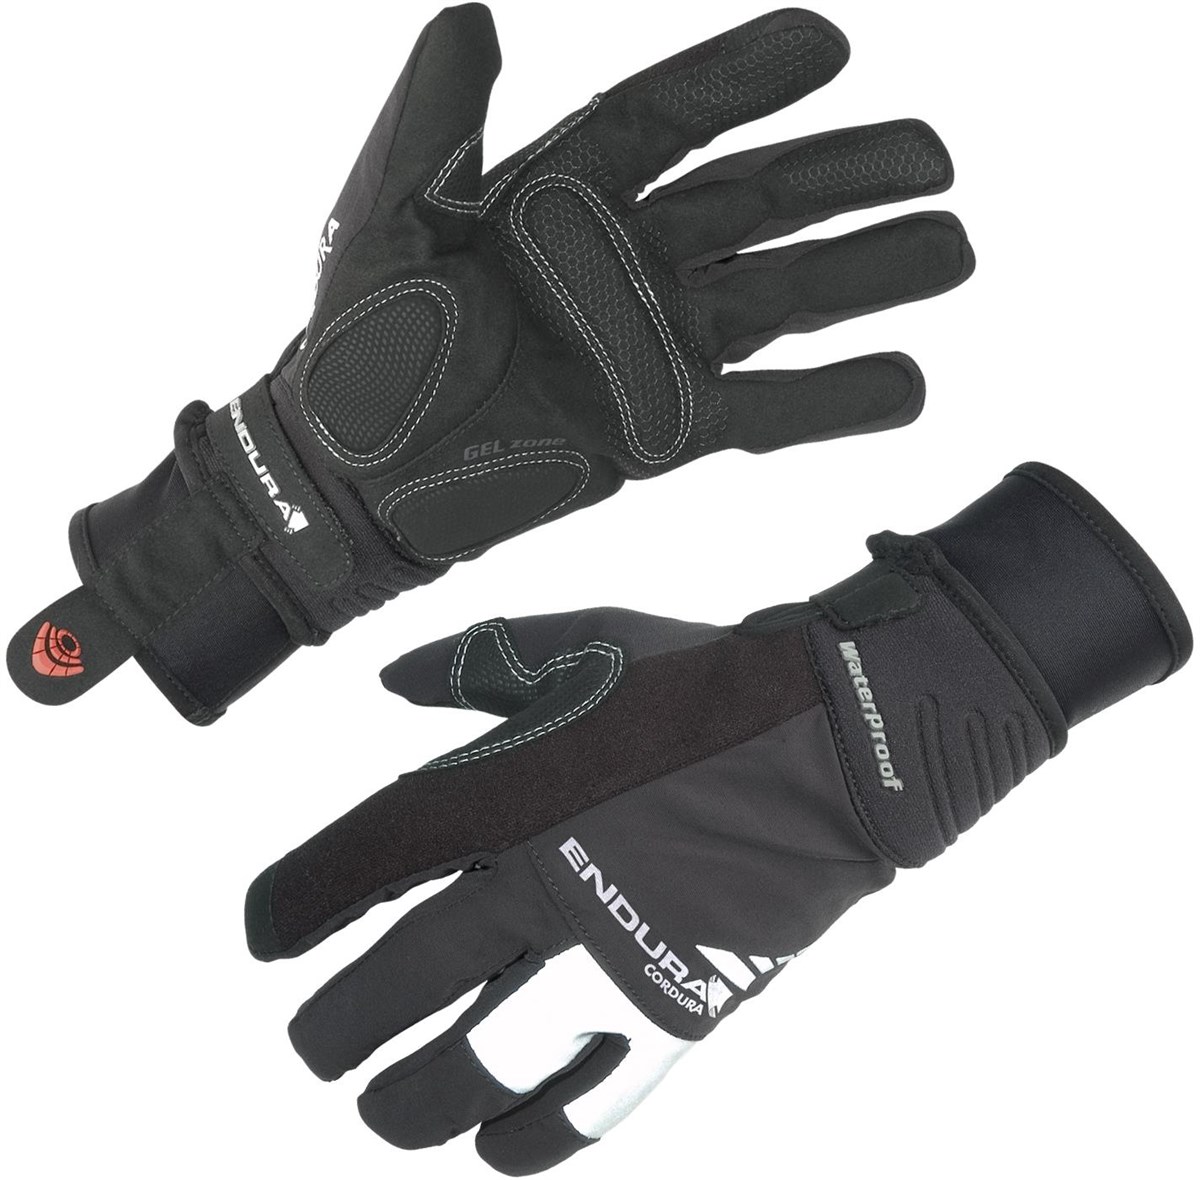 Endura Deluge Long Fingered Cycling Gloves product image